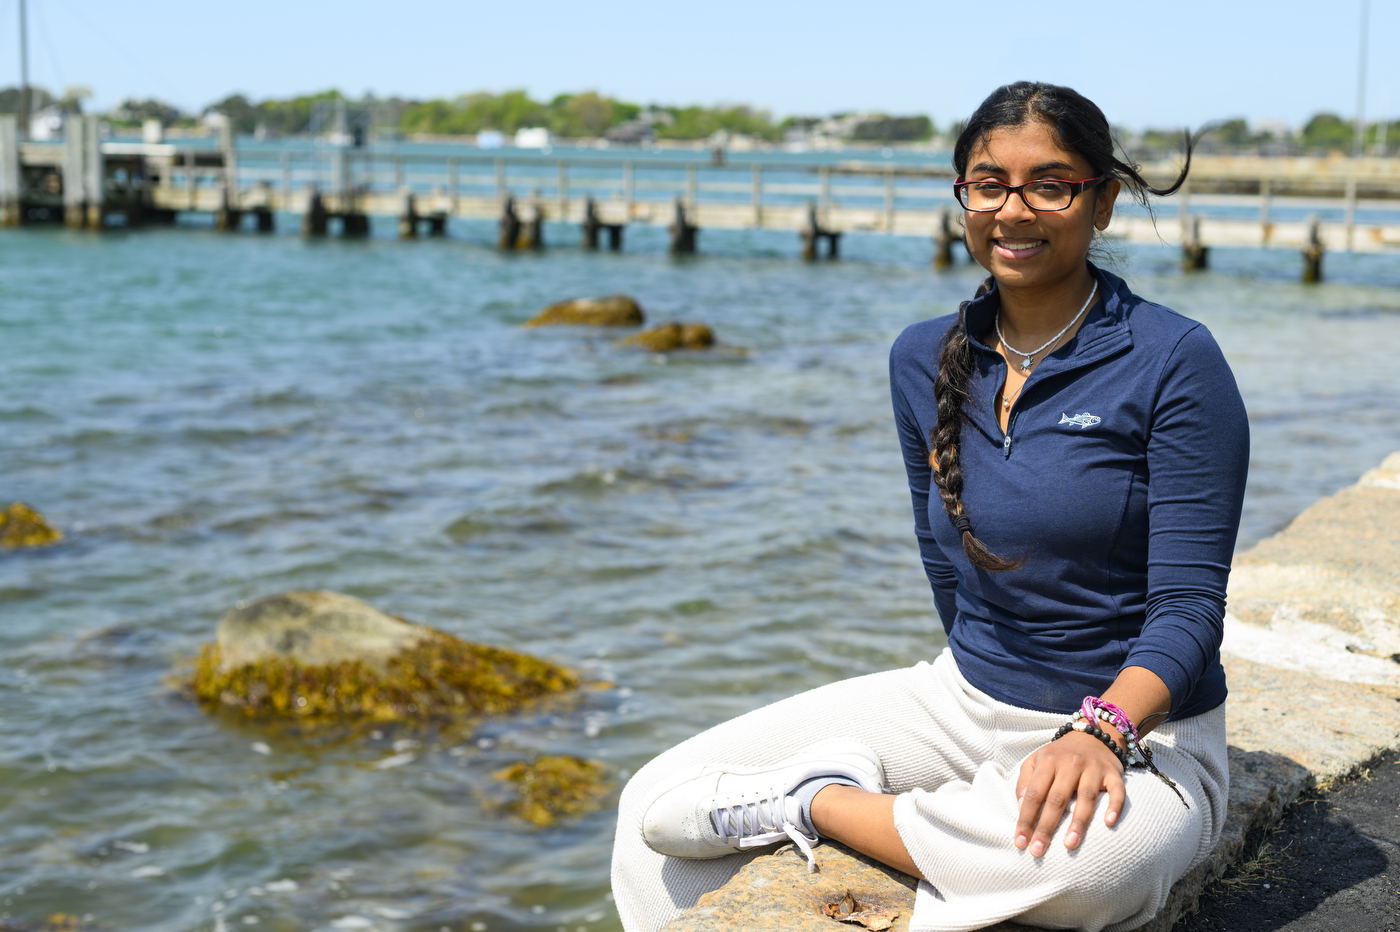 05/16/23 - BOSTON, MA. - Anushka Rajagopalan is conducting research on Alaskan algal blooms that cause shellfish-borne paralysis, killing marine mammals and sickening humans, during her co-op at the Woods Hole Oceanographic Institution on Tuesday, May 16, 2023. Photo by Alyssa Stone/Northeastern University